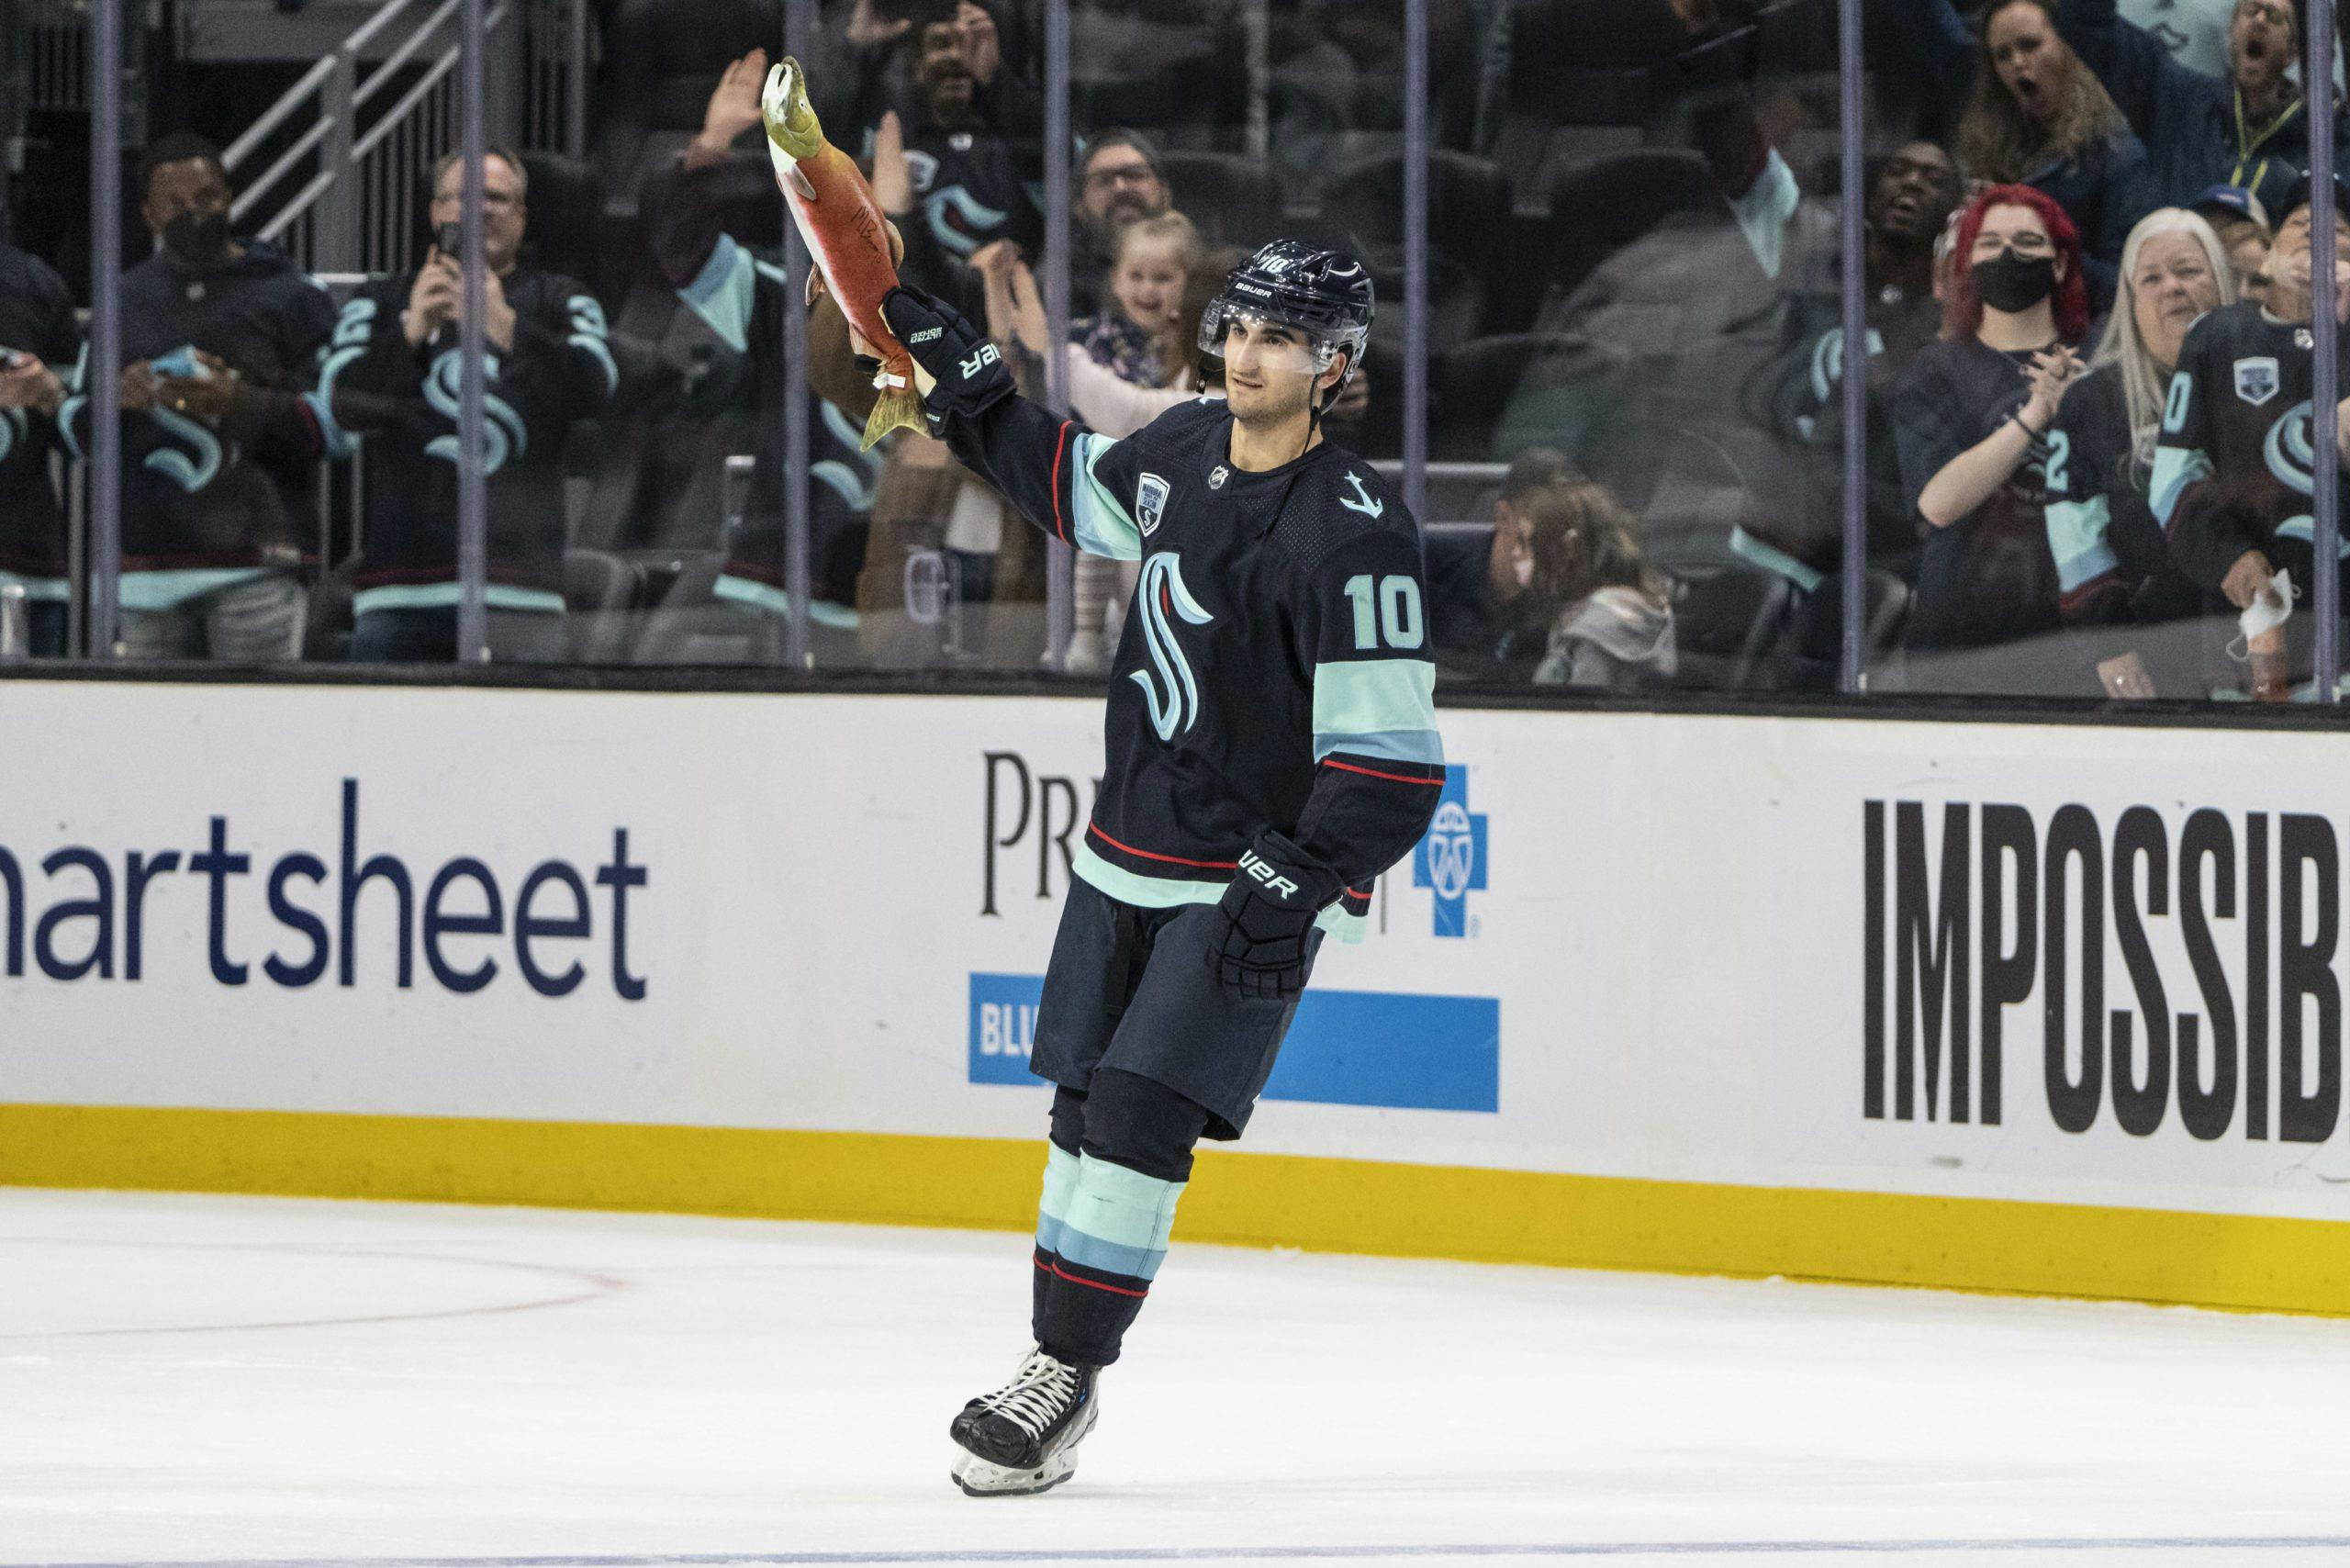 Photo gallery: A look at the NHL Seattle Kraken hockey team - Seattle Sports